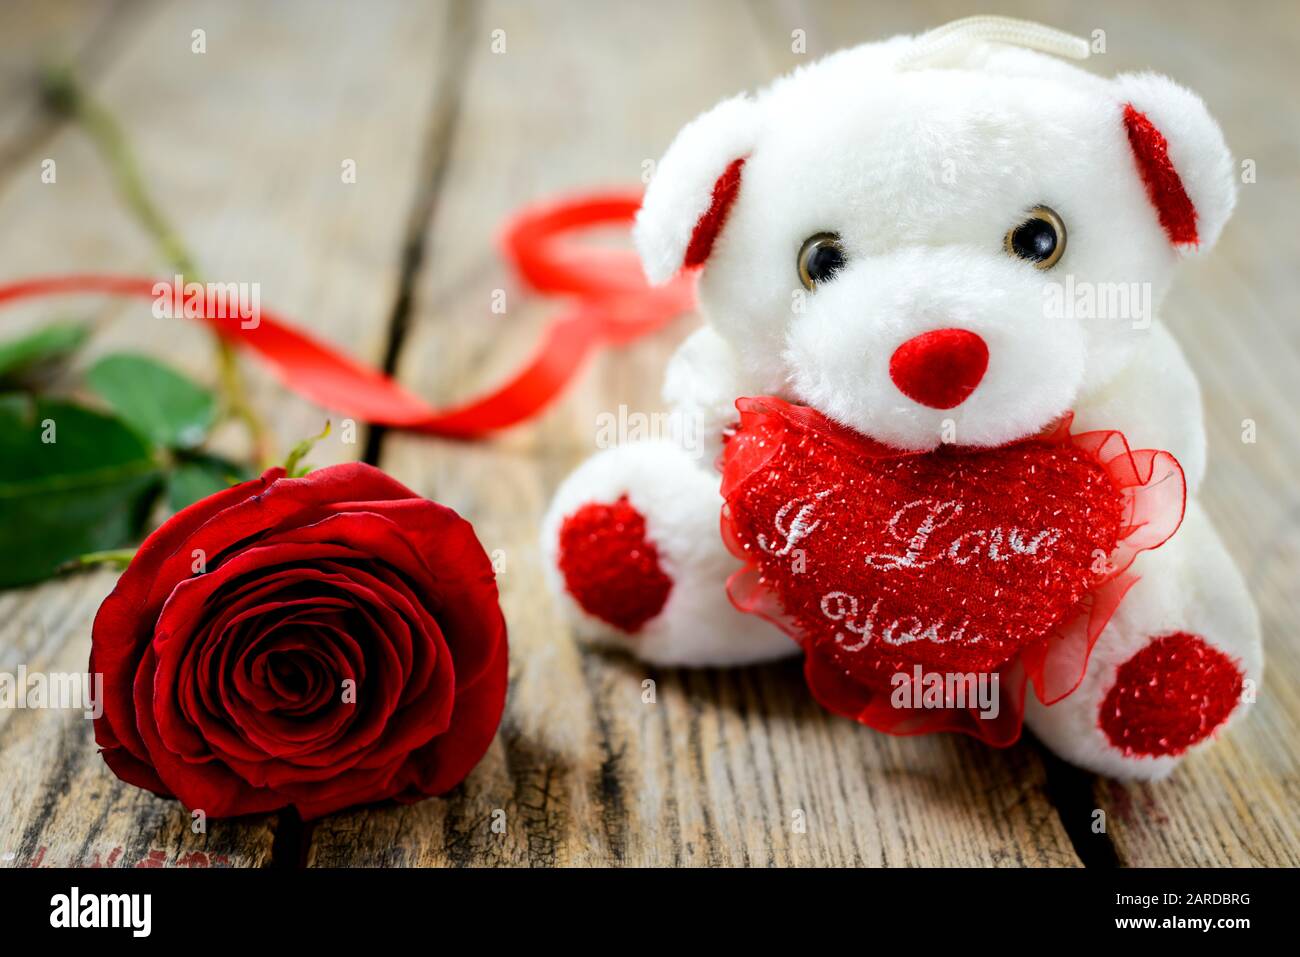 Valentines day concept. White plush toy bear and red rose on wooden table. Selective focus. Stock Photo